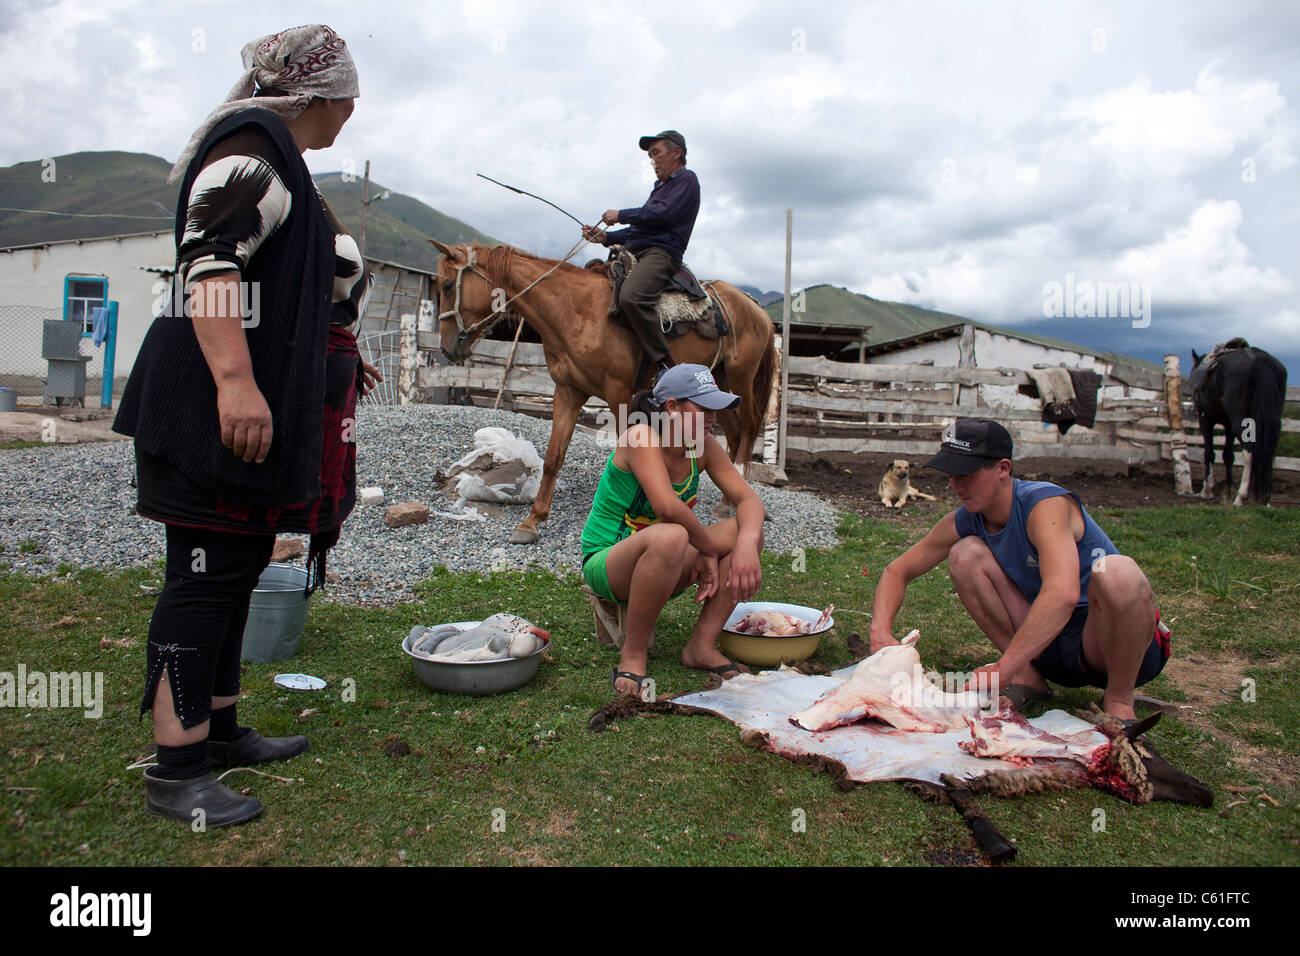 Slaughtering a goat in Kyrgyzstan Stock Photo